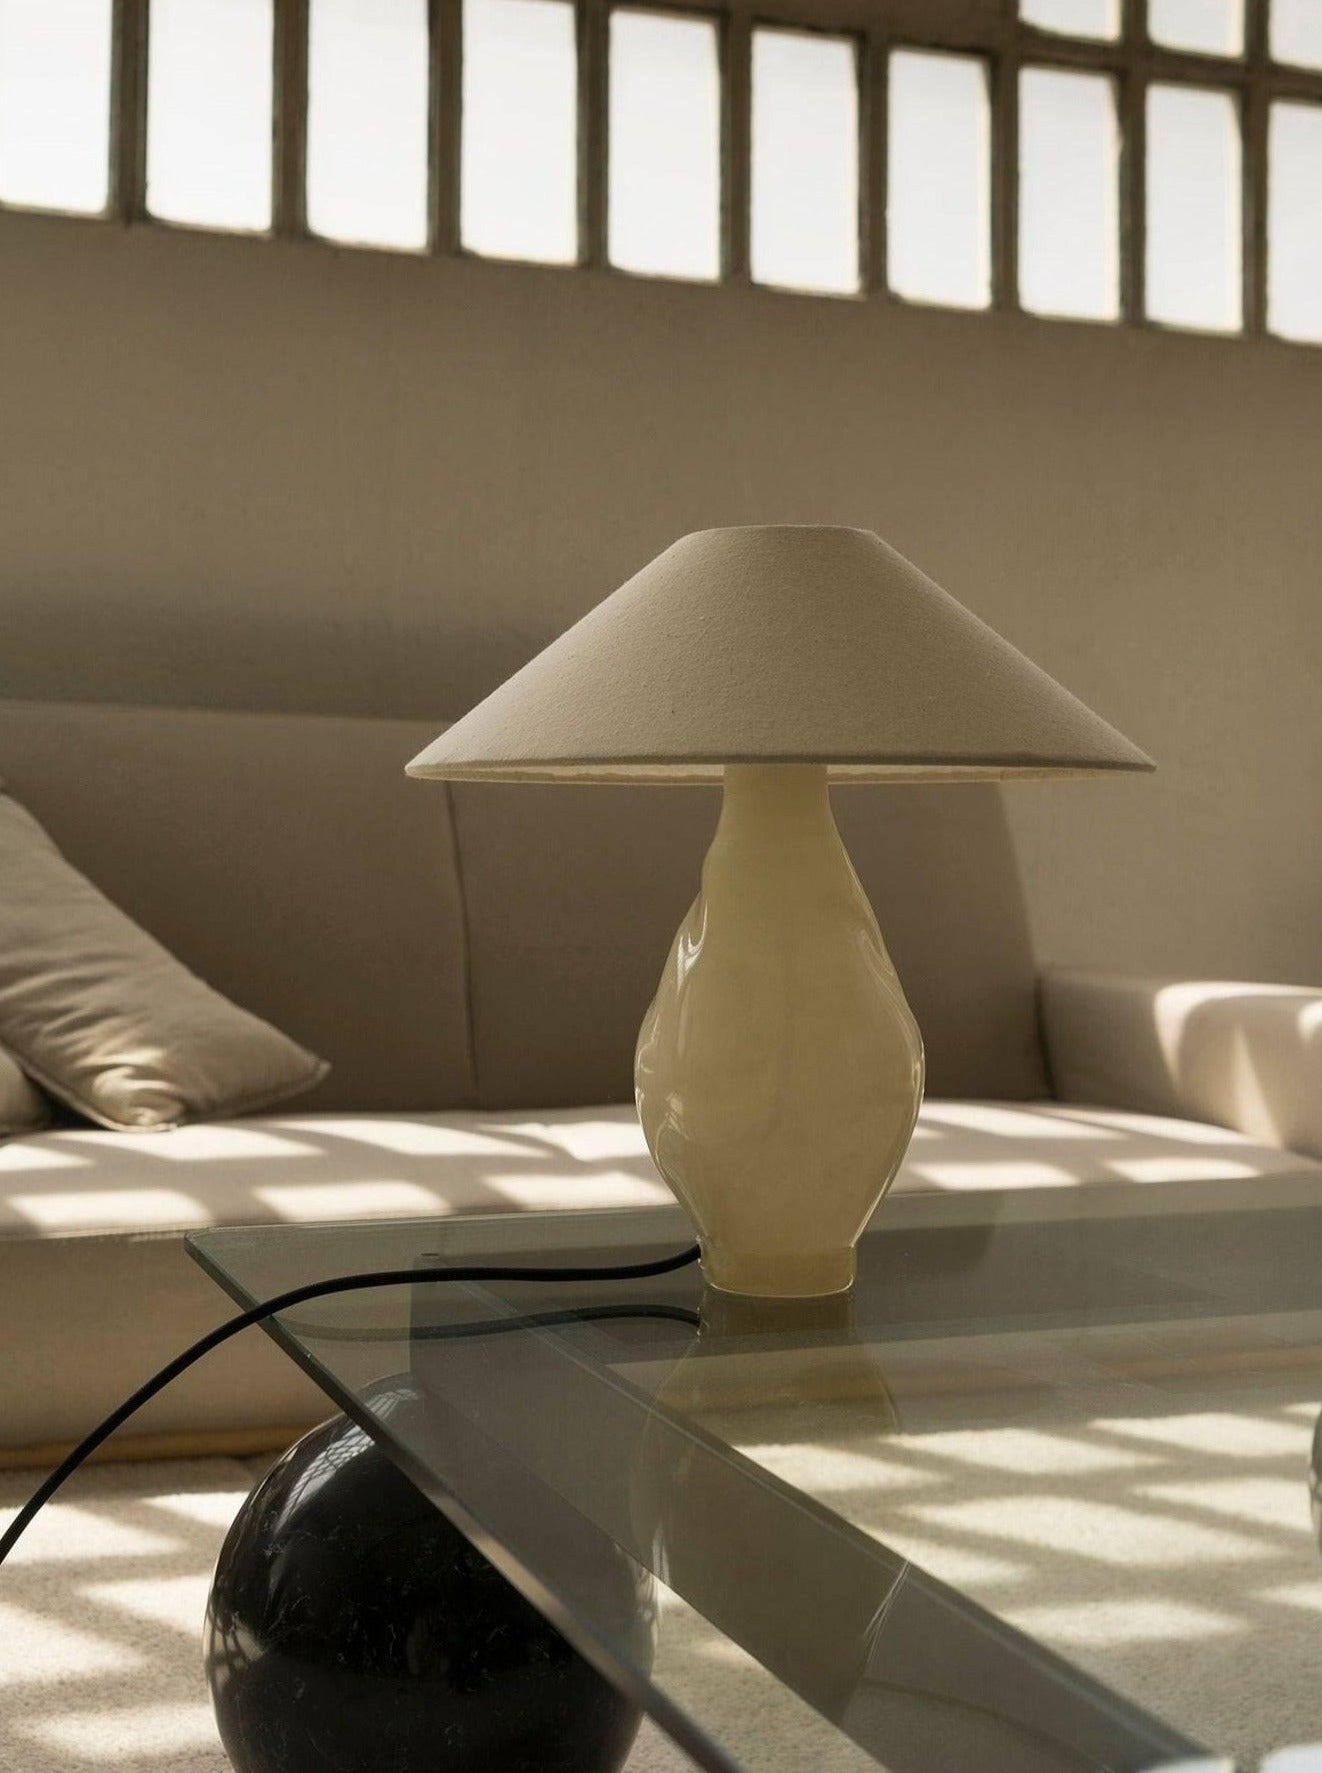 A minimalist interior features a Los Objetos Decorativos handmade beige conical glass lamp with a smooth, ceramic base and a matching shade, sitting on a glass table in a room bathed in soft, natural light.